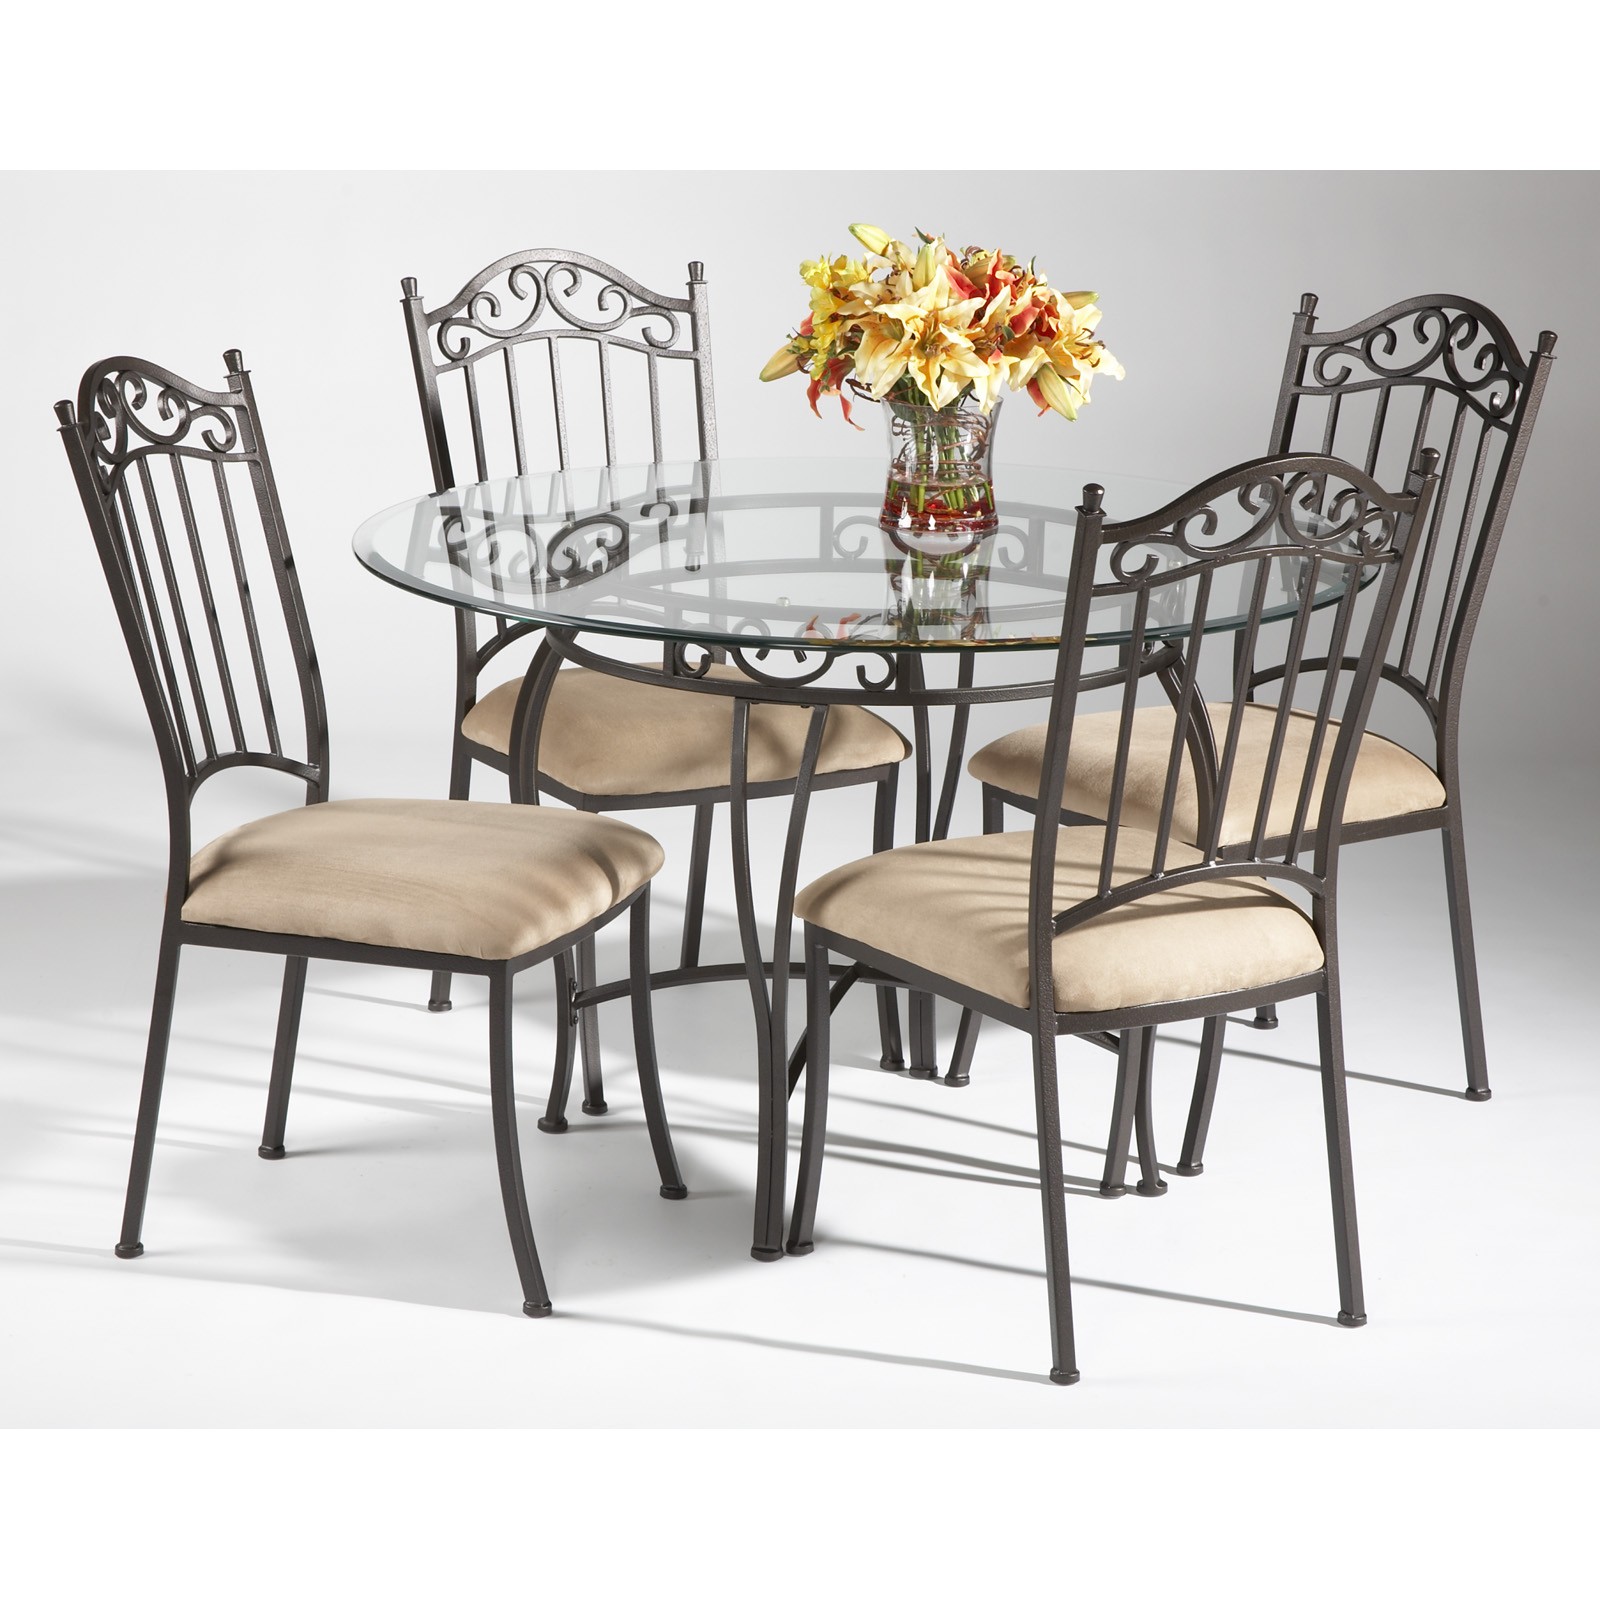 Chintaly bethel 5 piece round wrought iron dining table